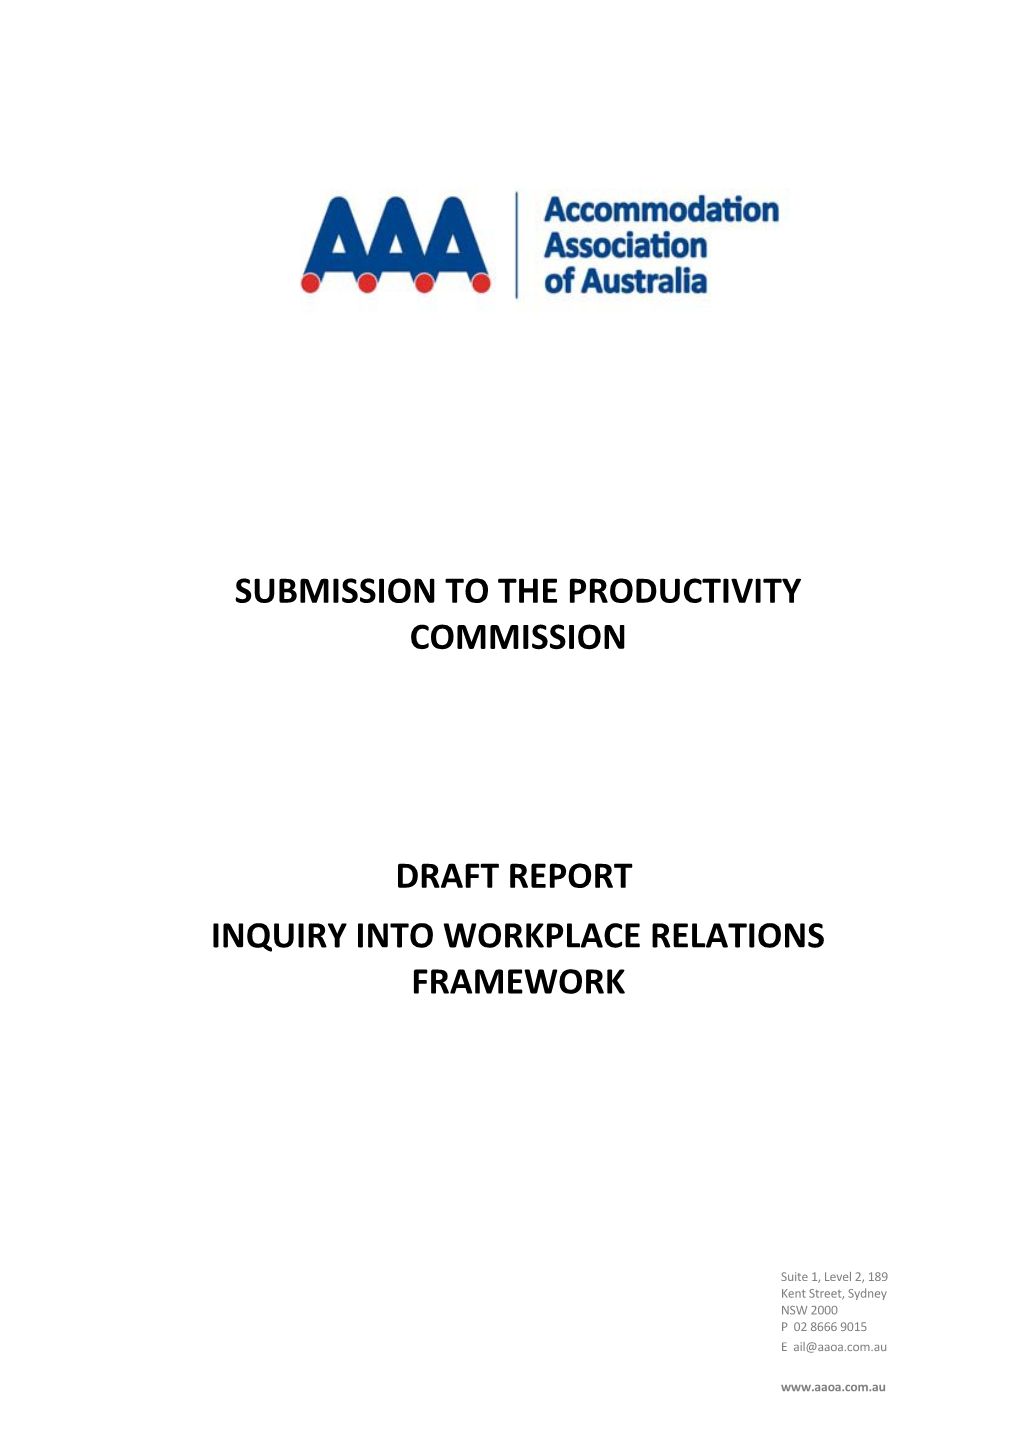 Submission DR308 - Accommodation Association of Australia - Workplace Relations Framework